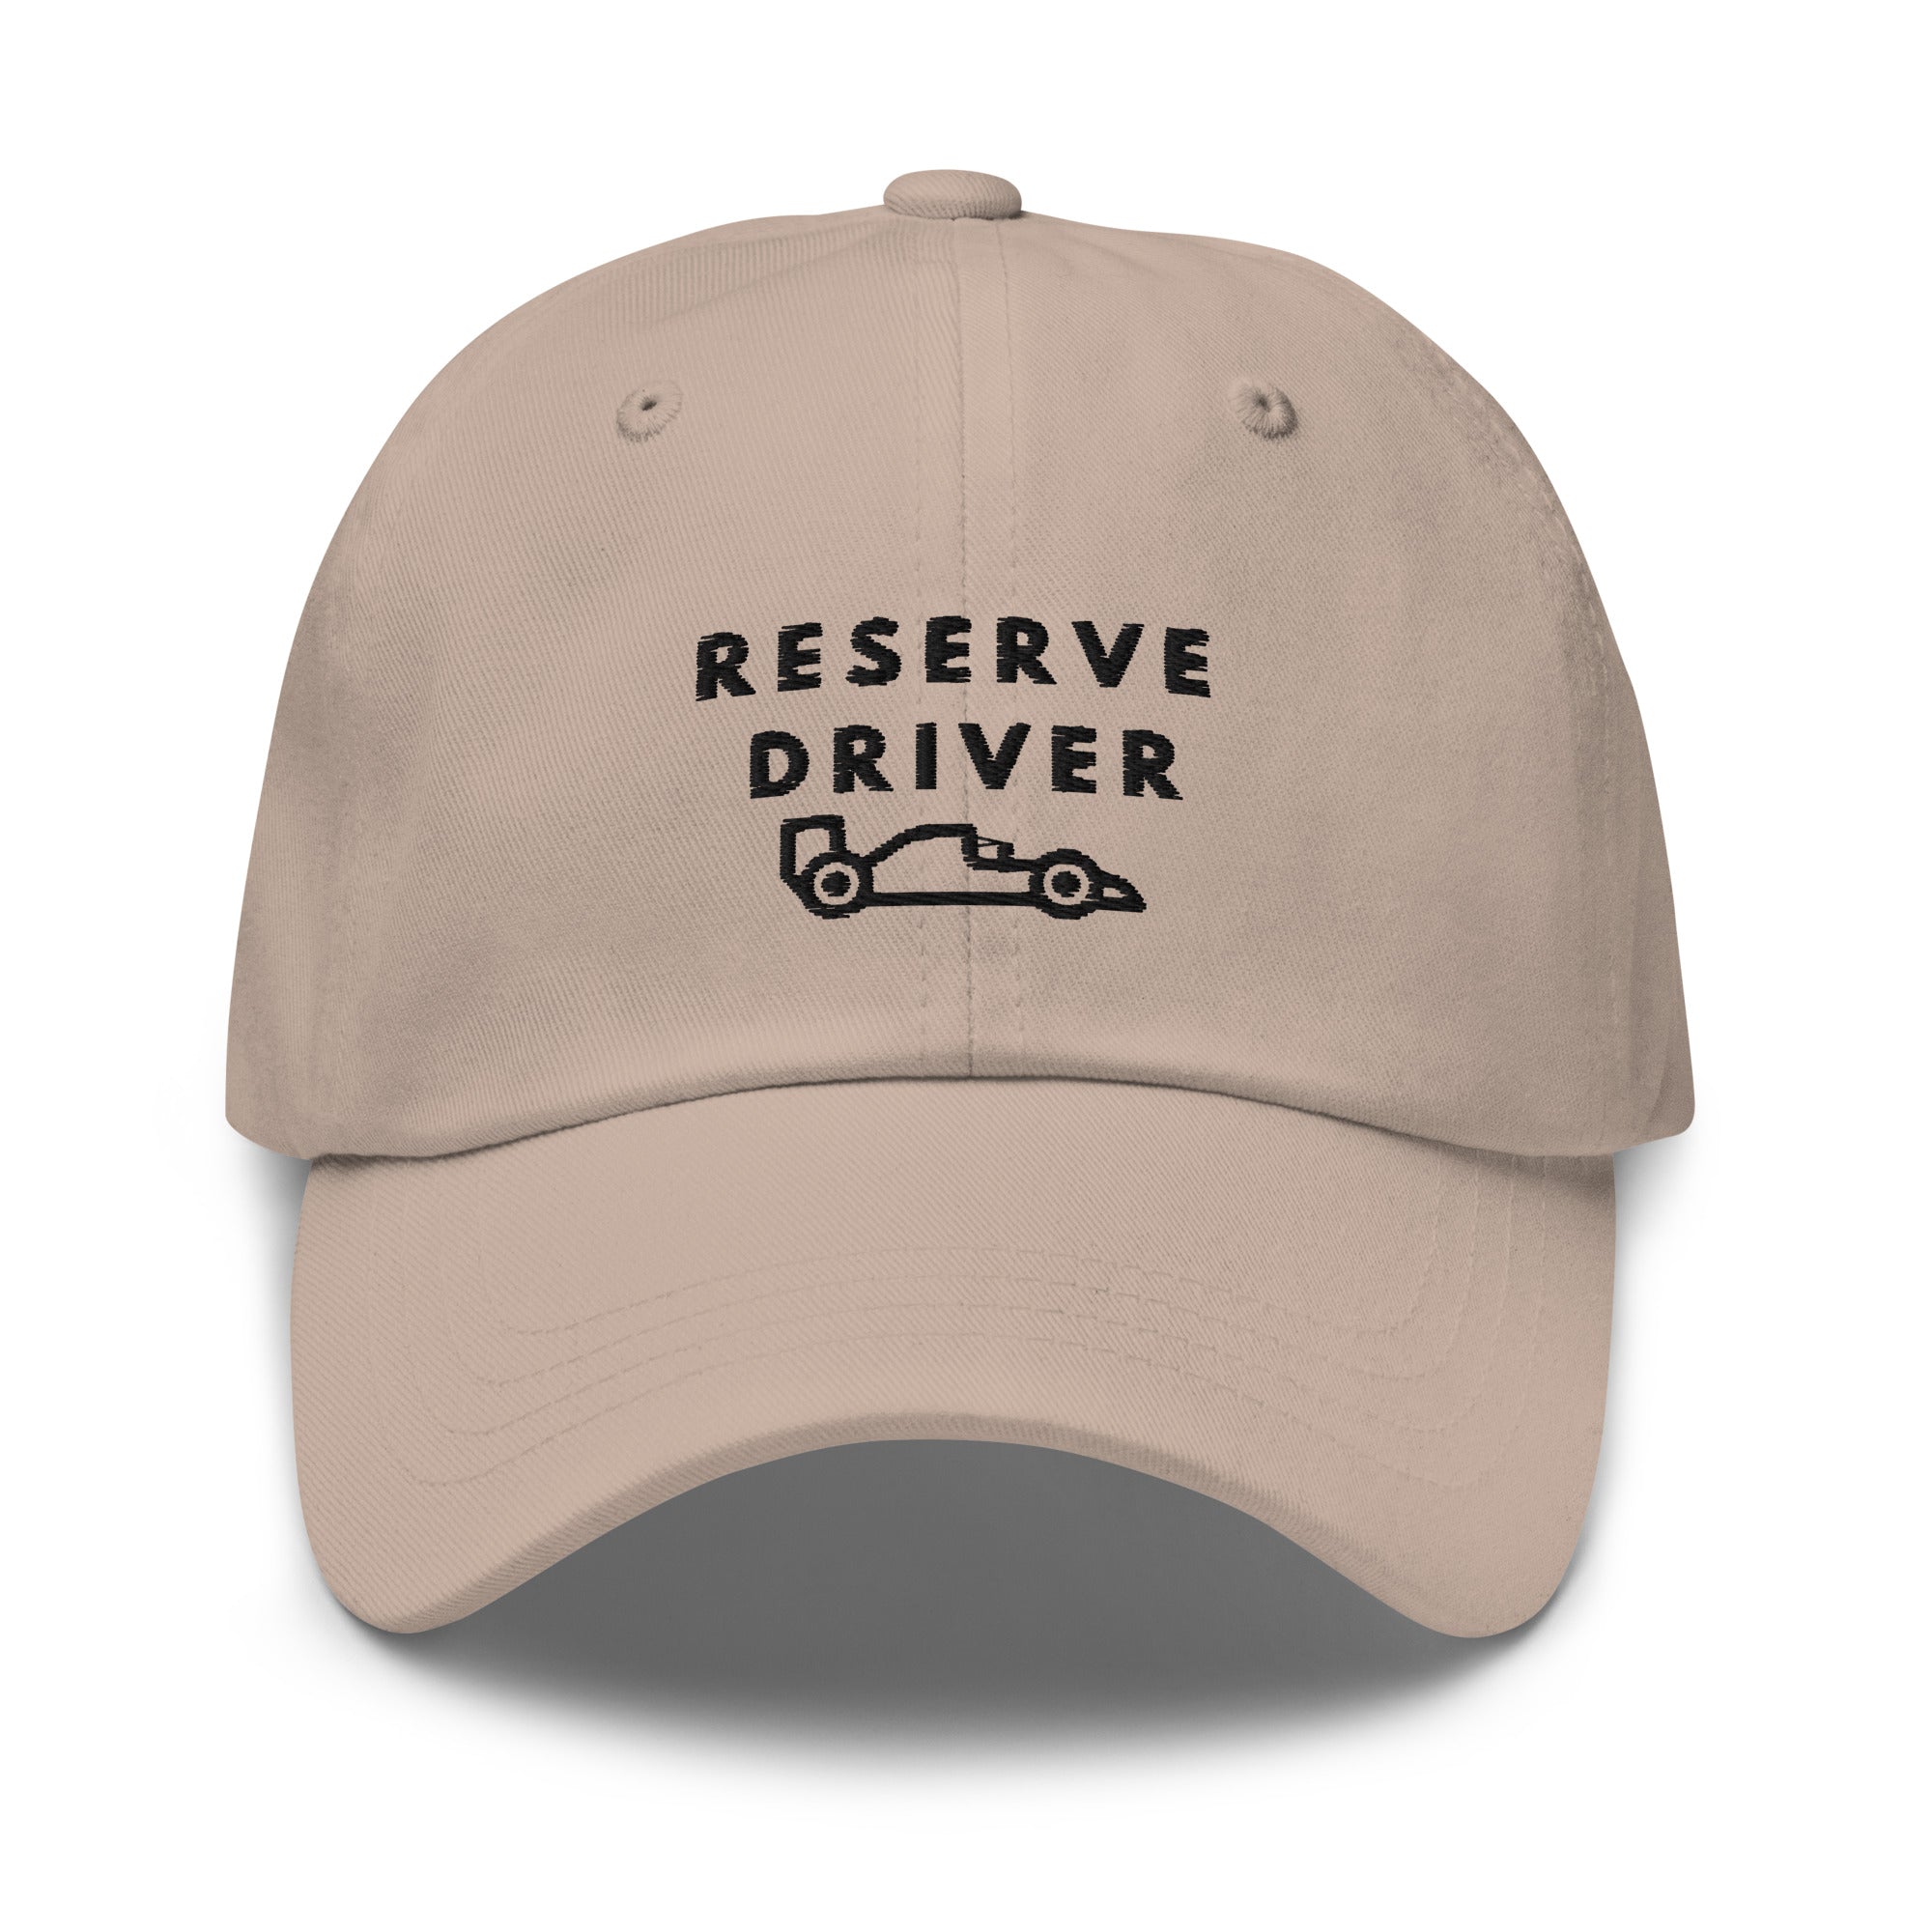 Reserve Driver Embroidered Dad hat